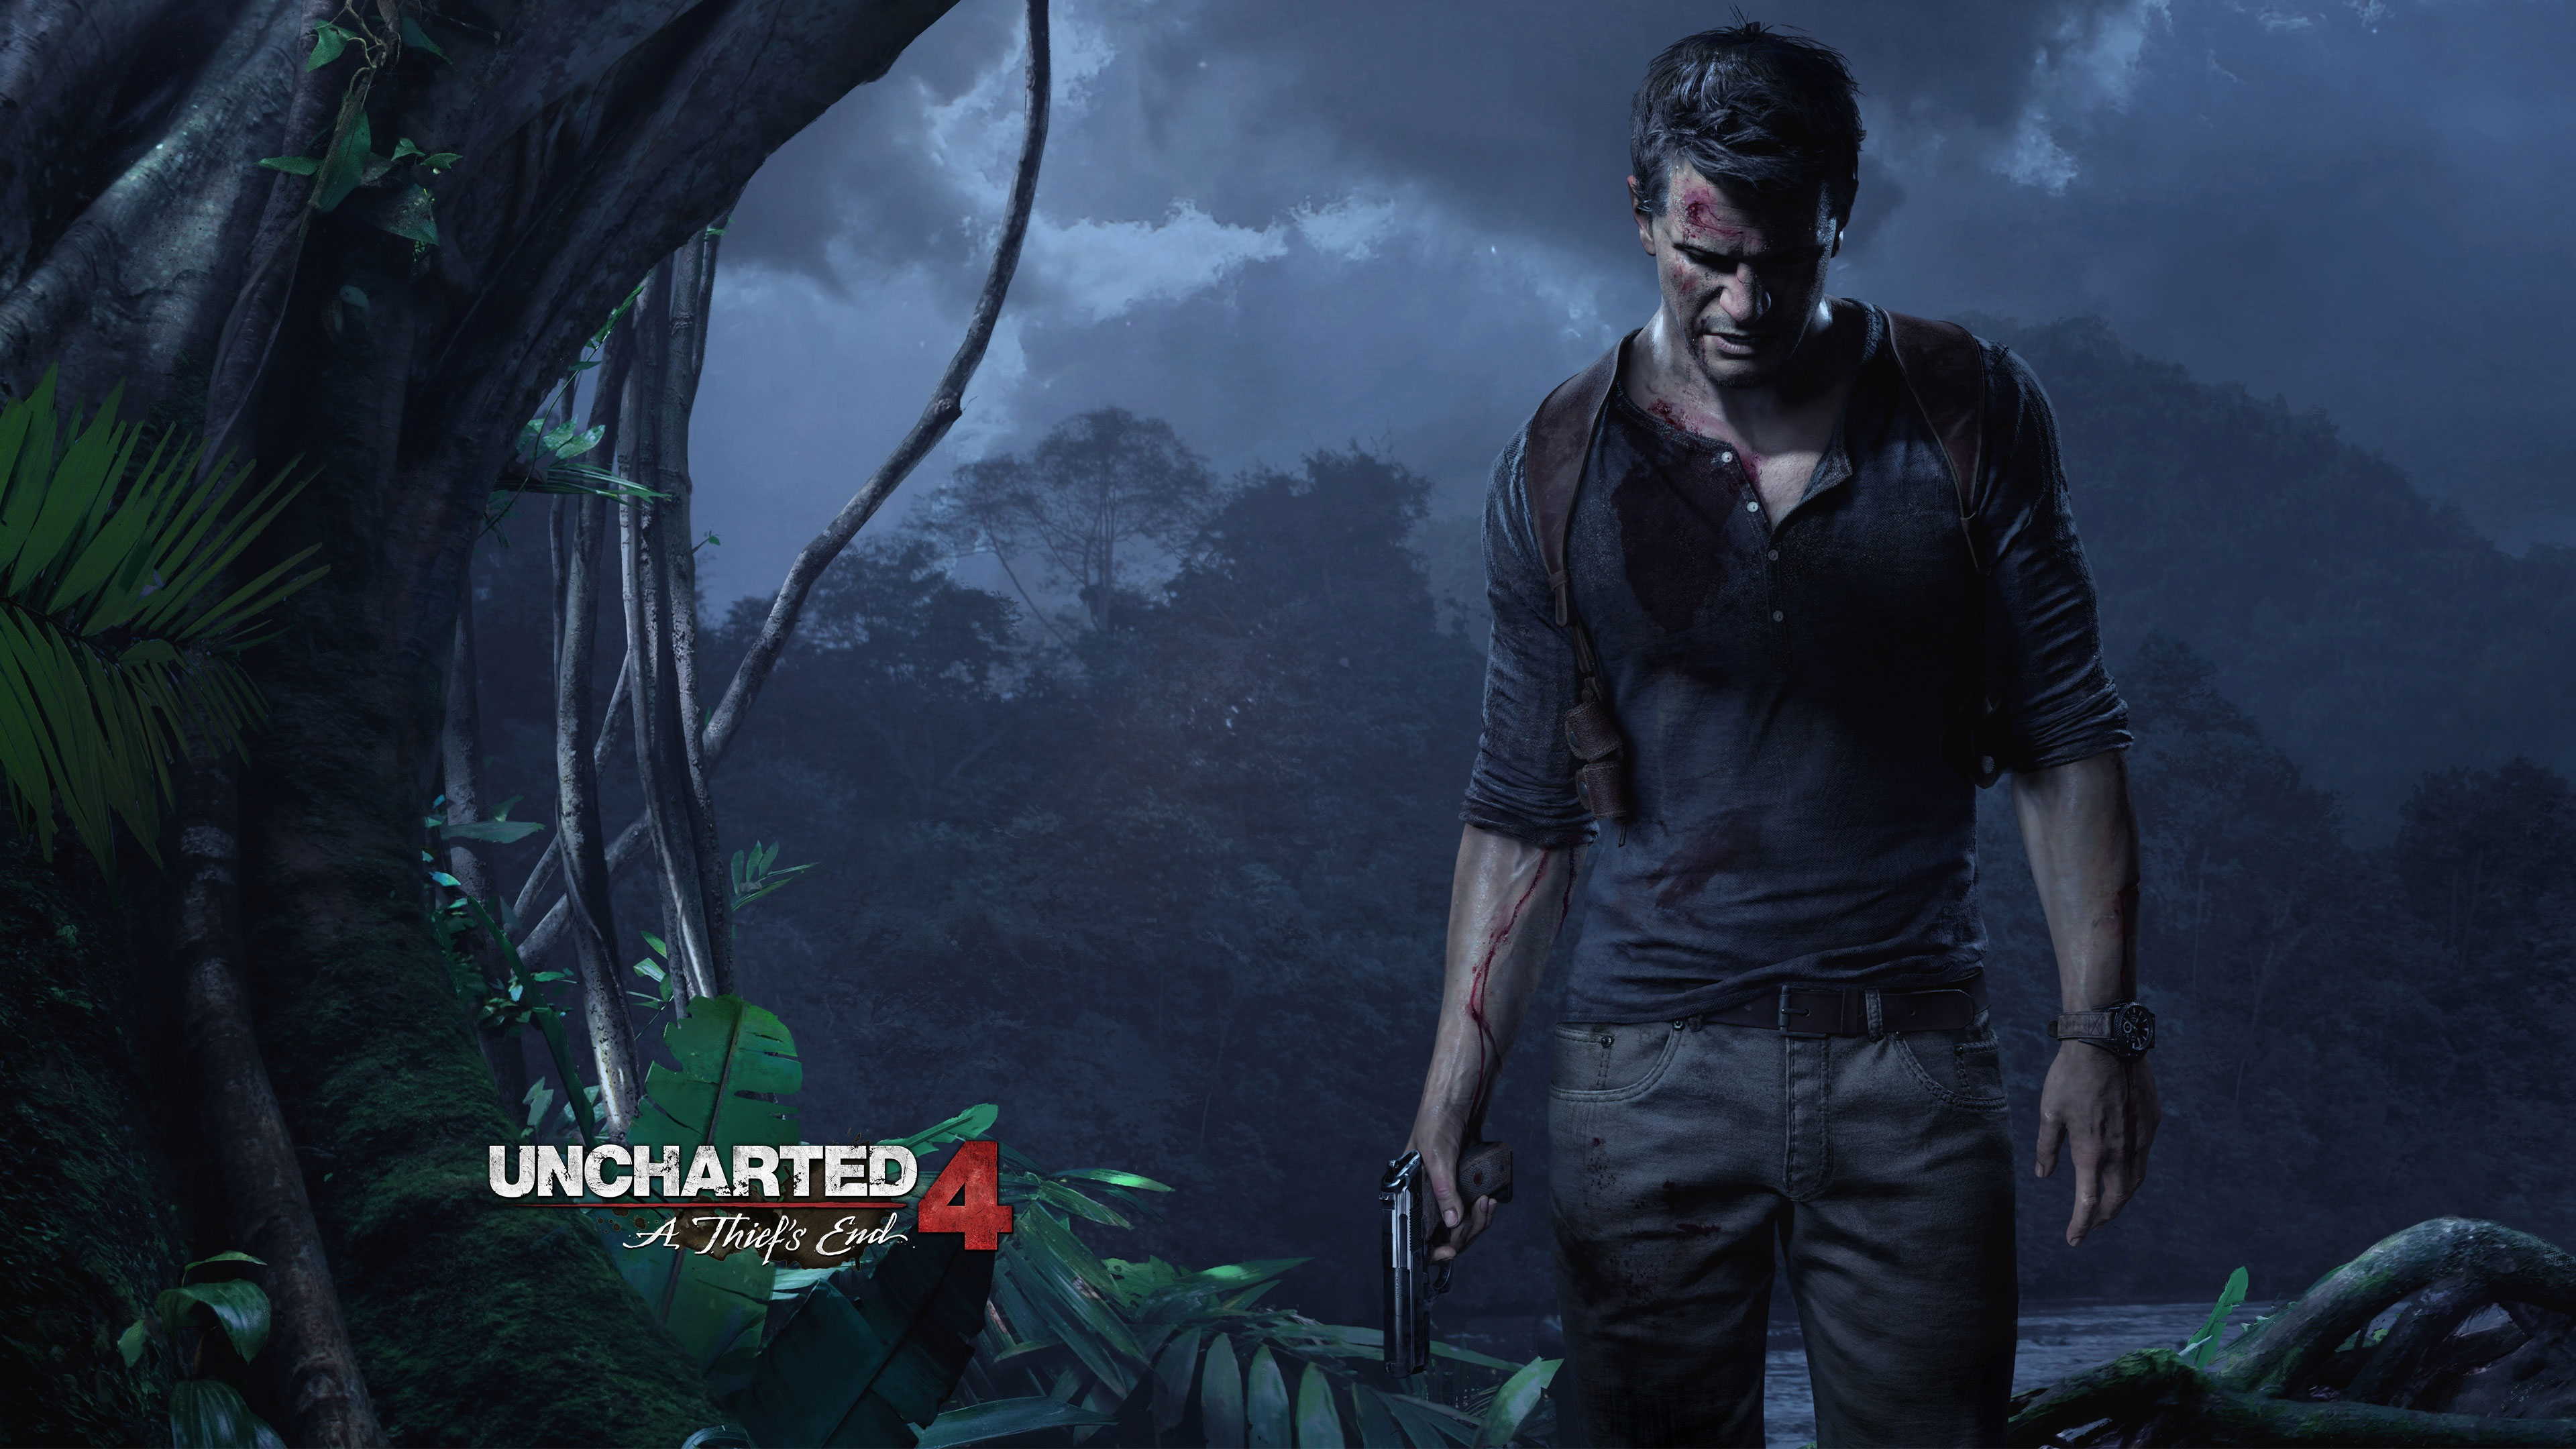 Uncharted 4 game length